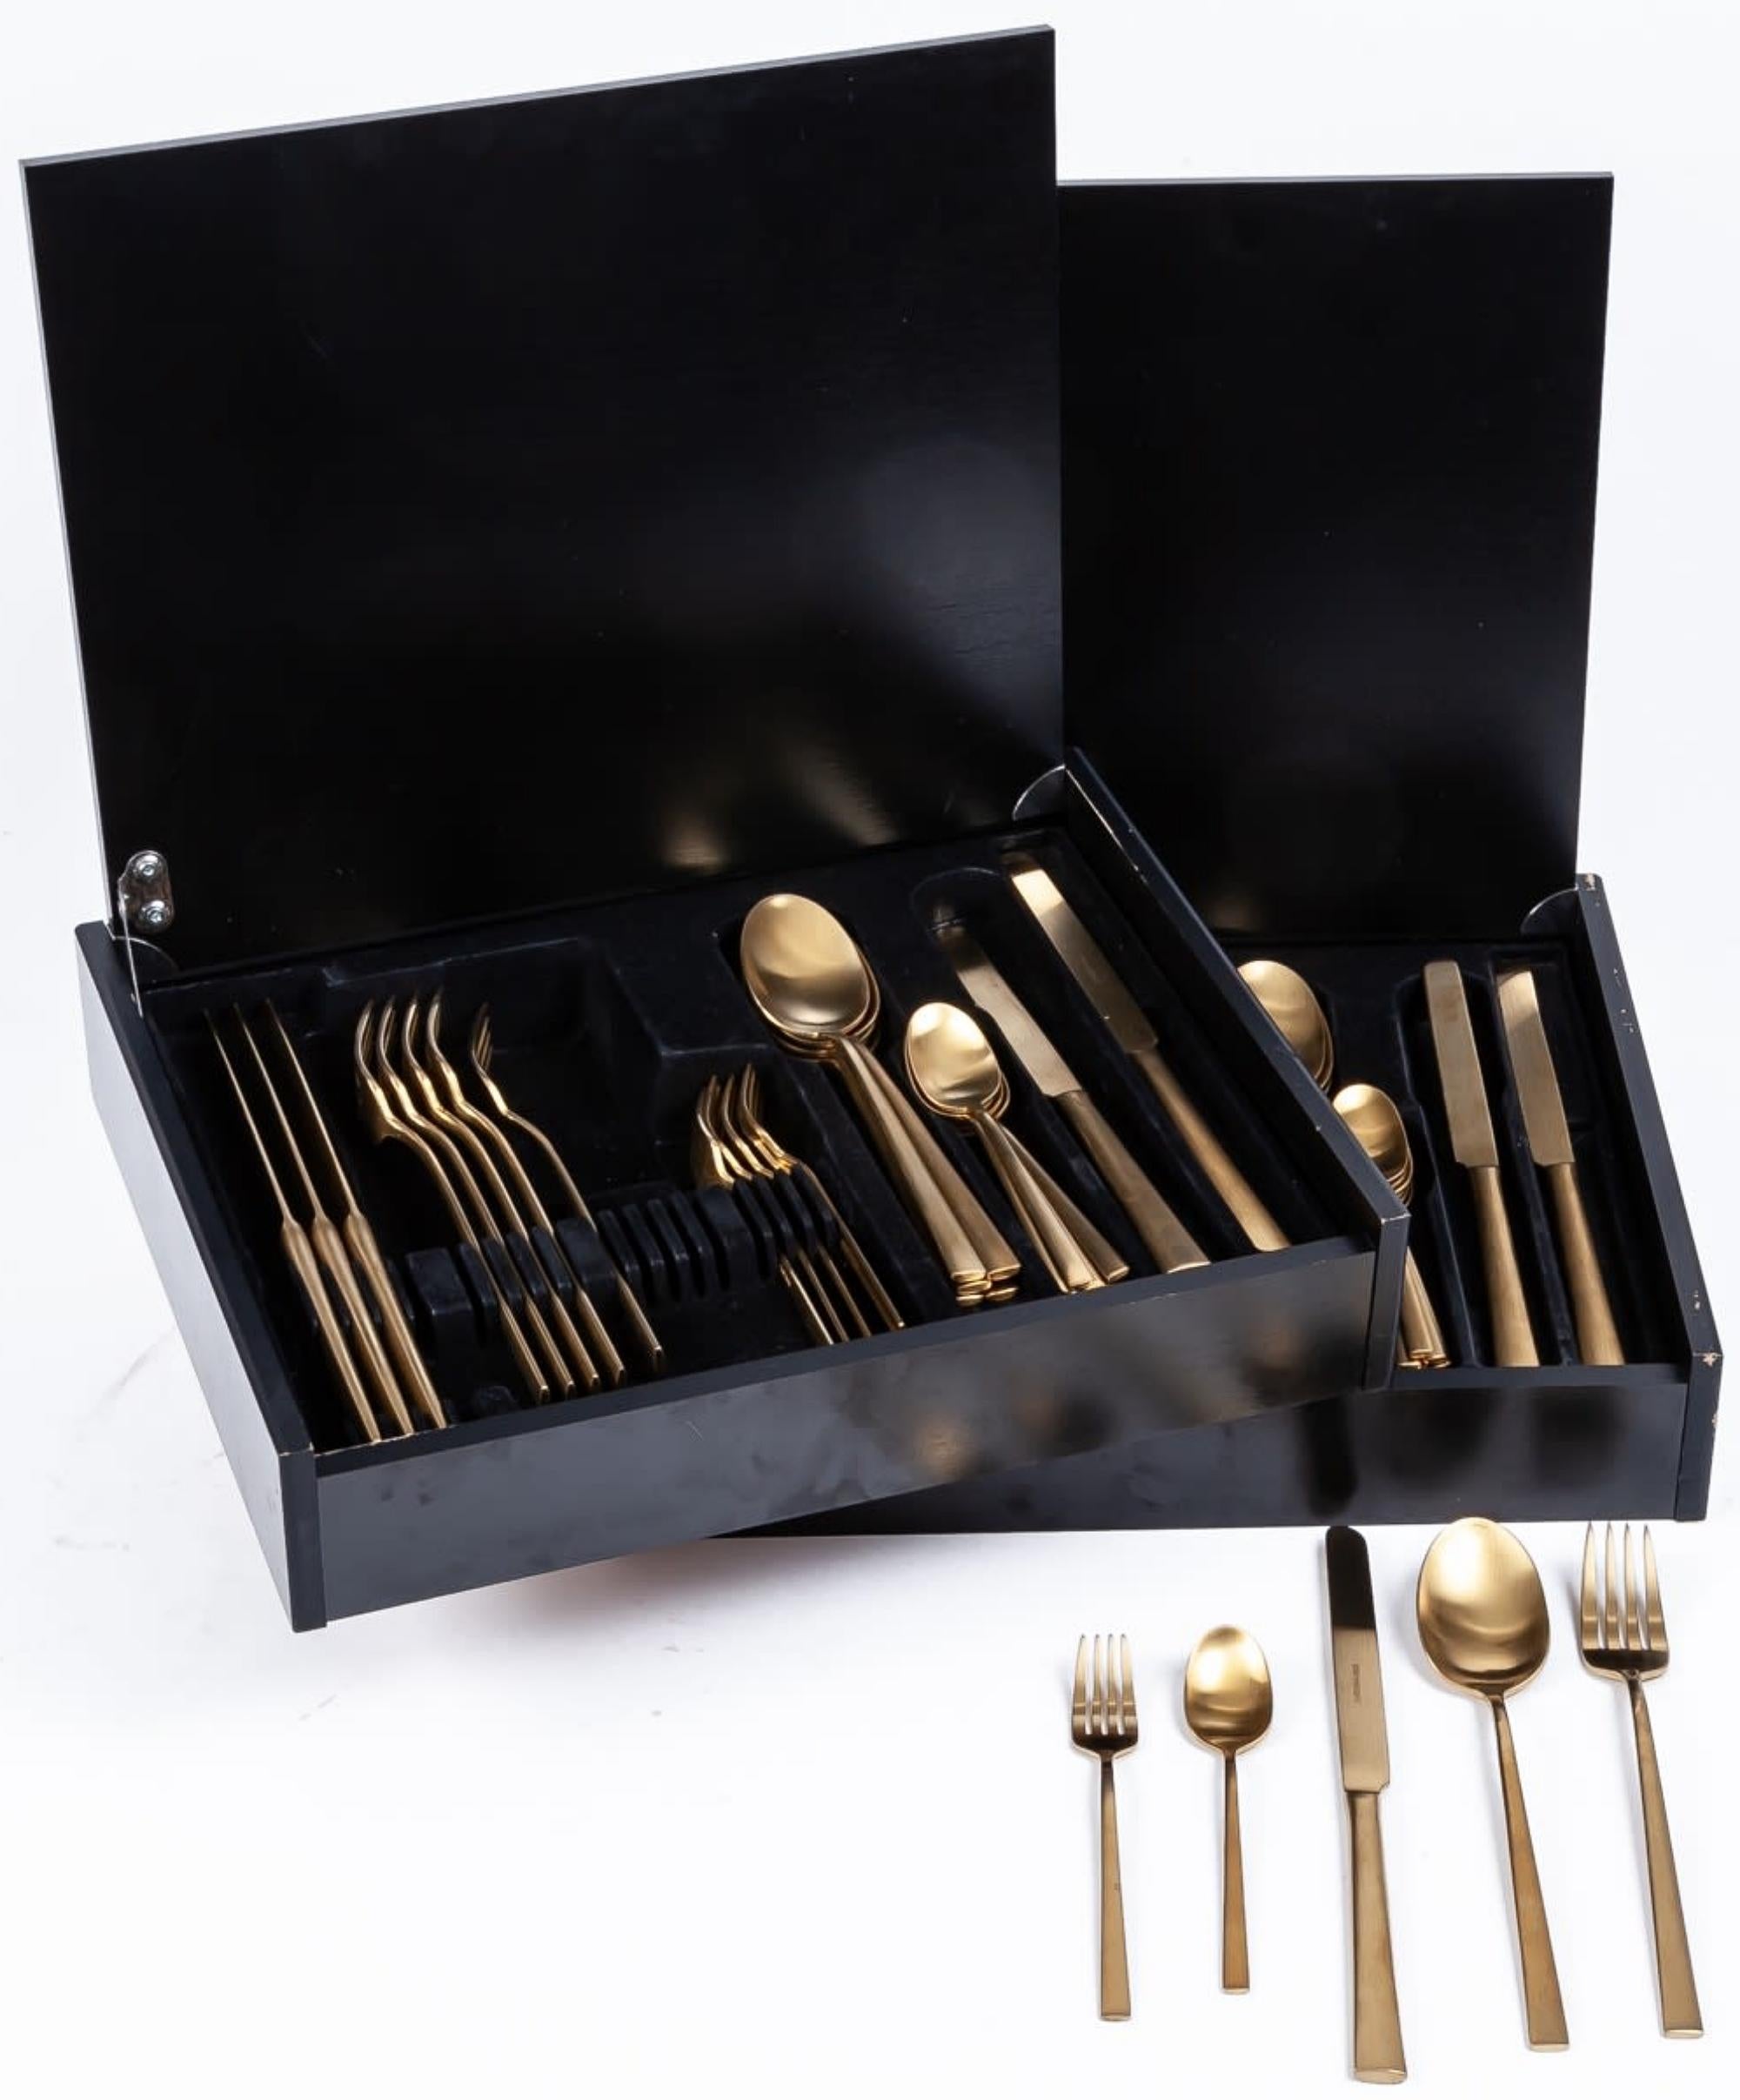 Beautiful German Cutlery for 12 People 20th Century
golden metal services in their cases
perfect conditions
Highest height: 23cm